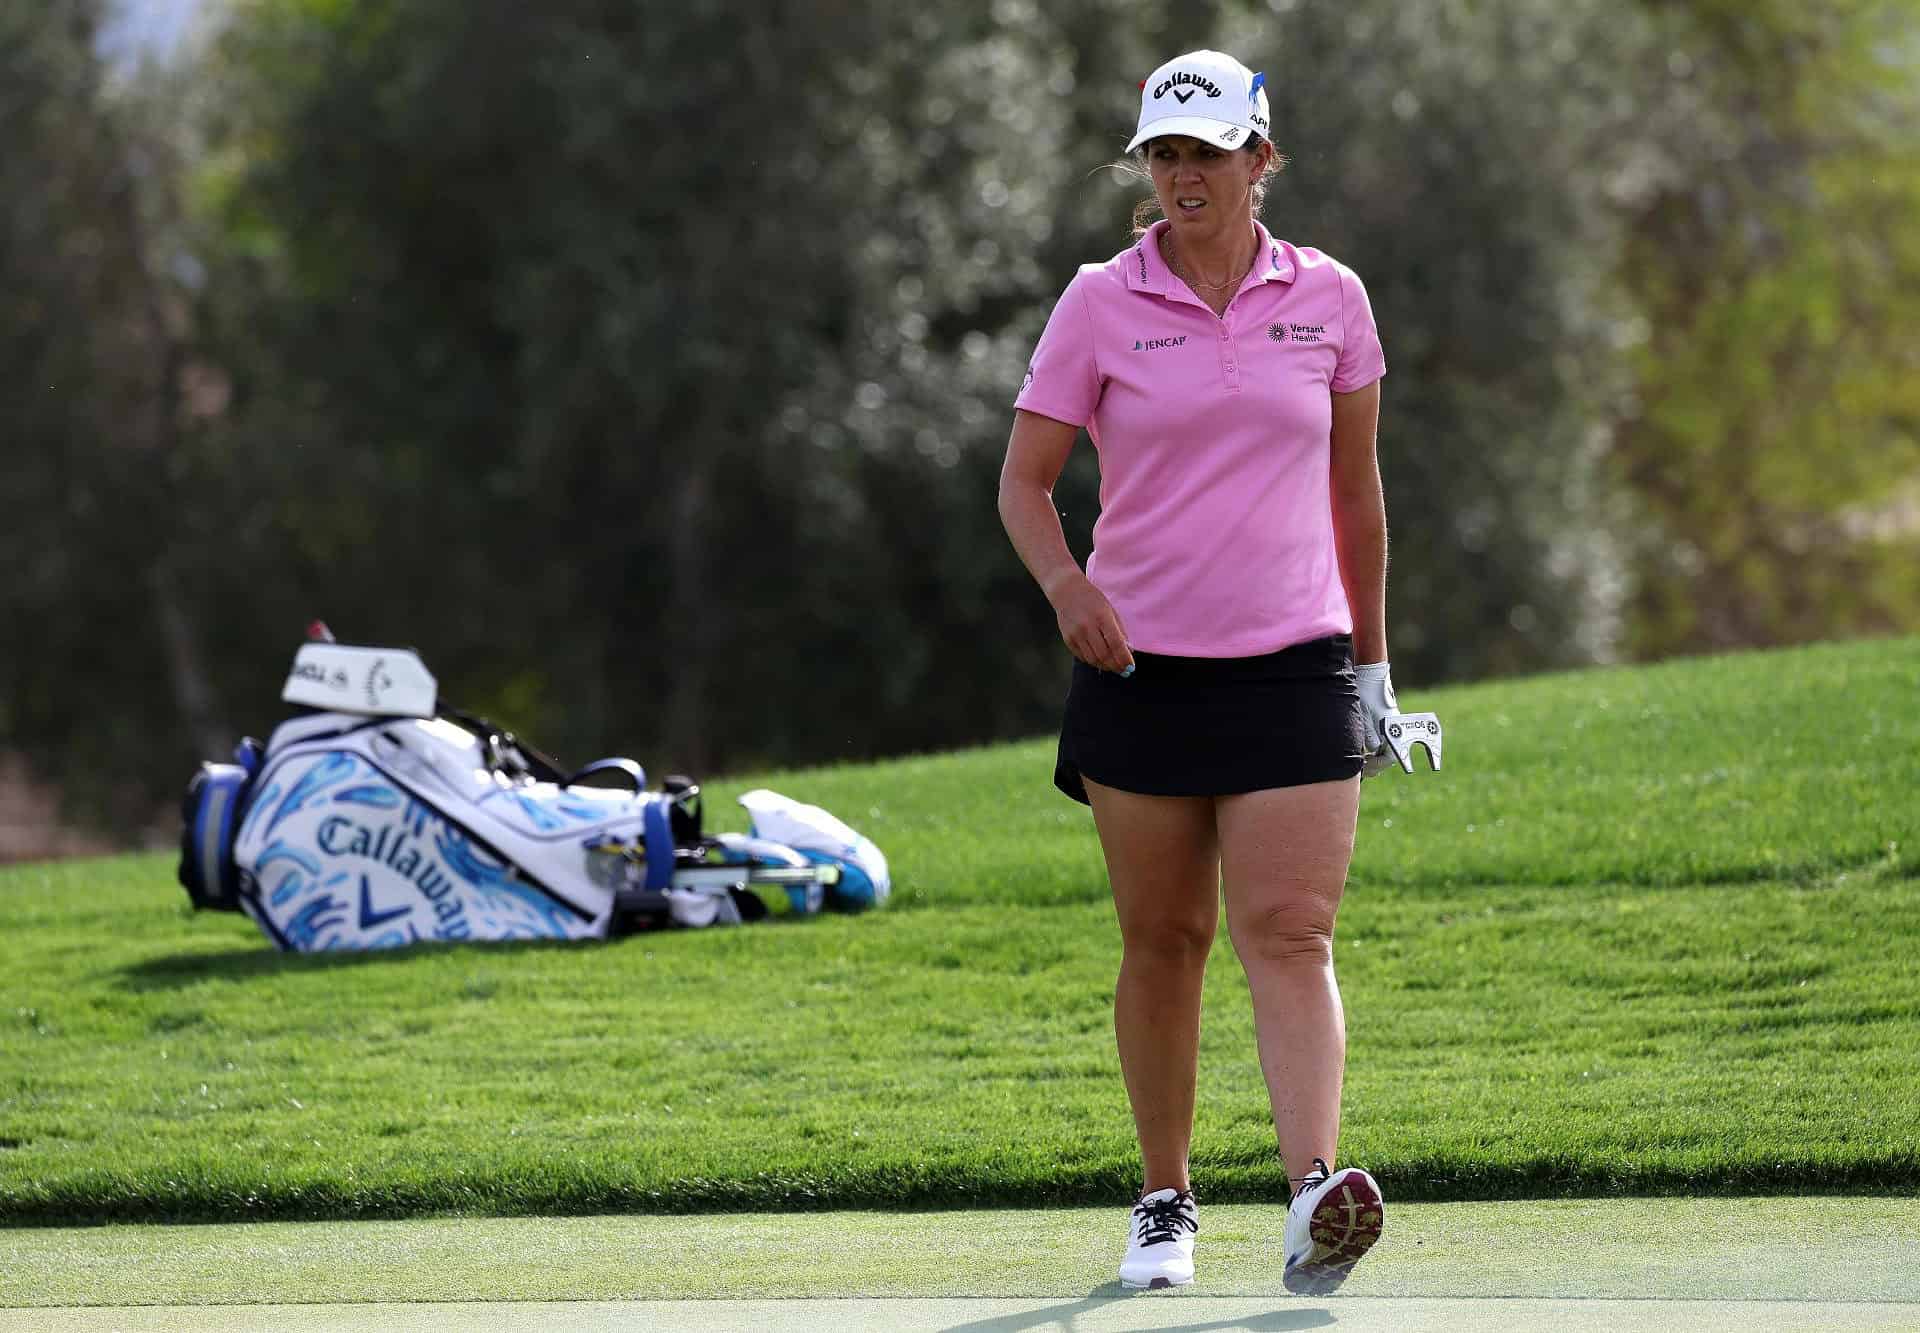 LPGA star ends round putting with wedge after 'freak accident'